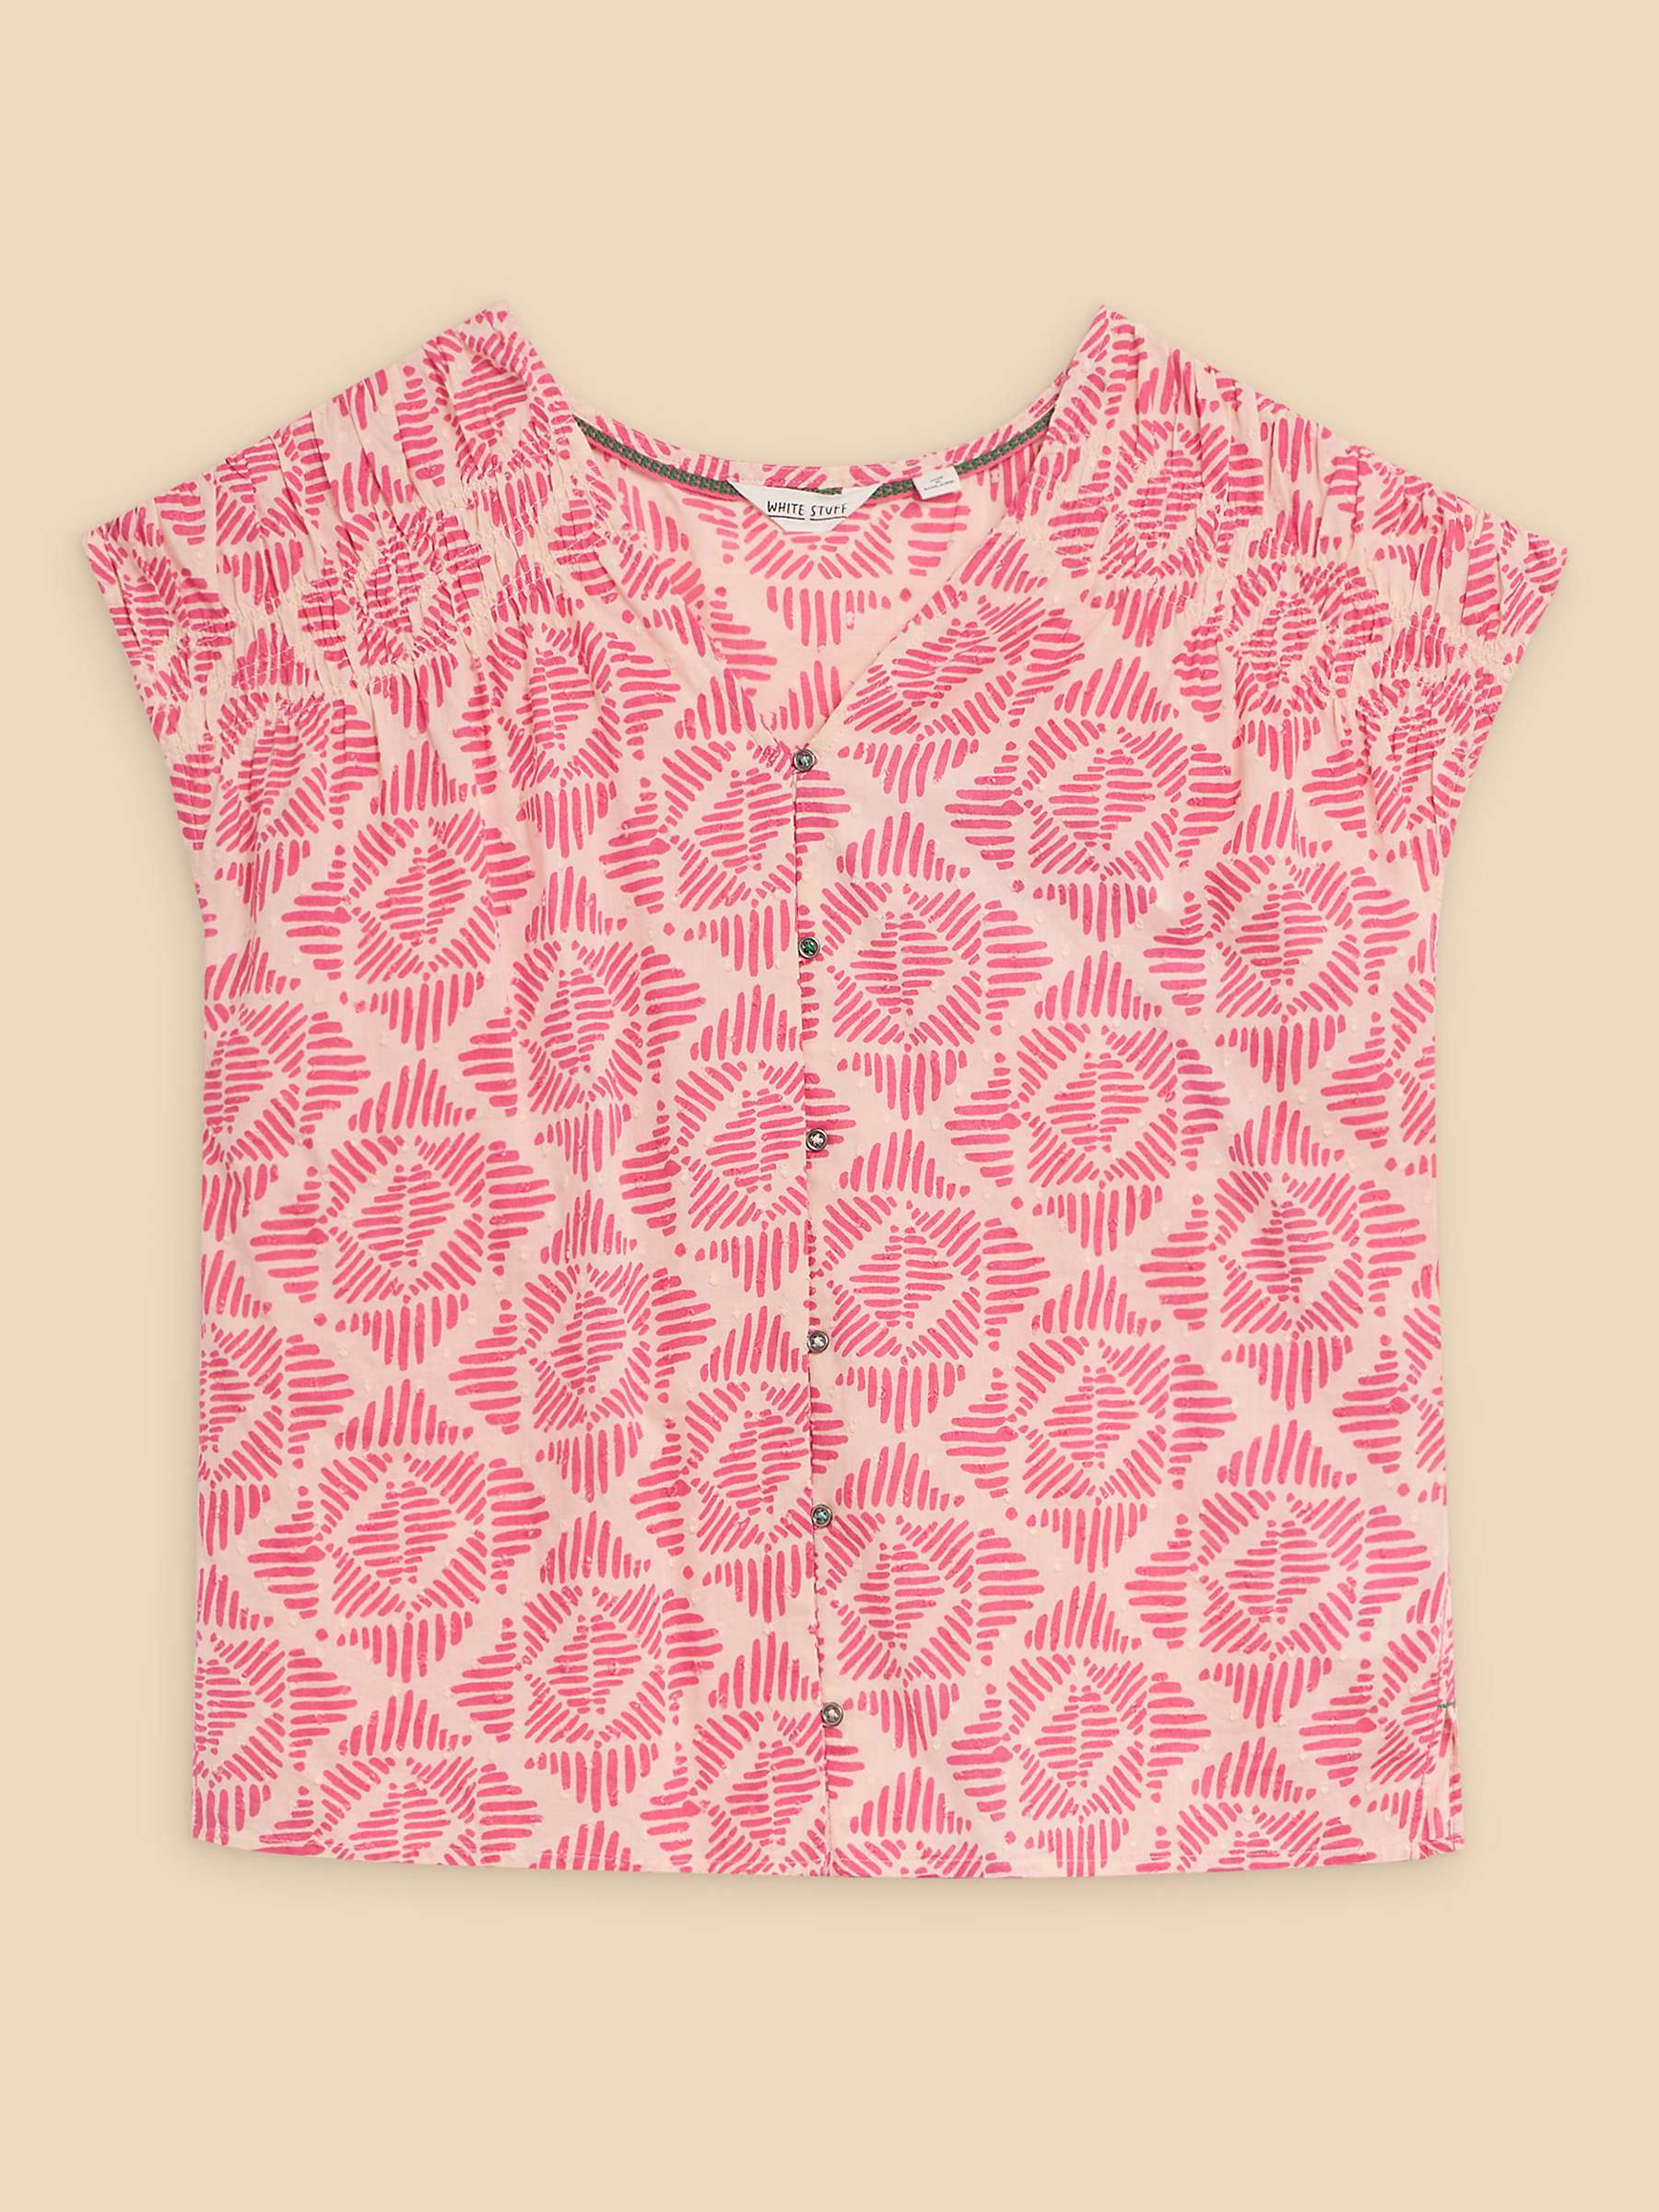 Buy White Stuff Rae Abstract Print Organic Cotton Blouse, Pink Online at johnlewis.com